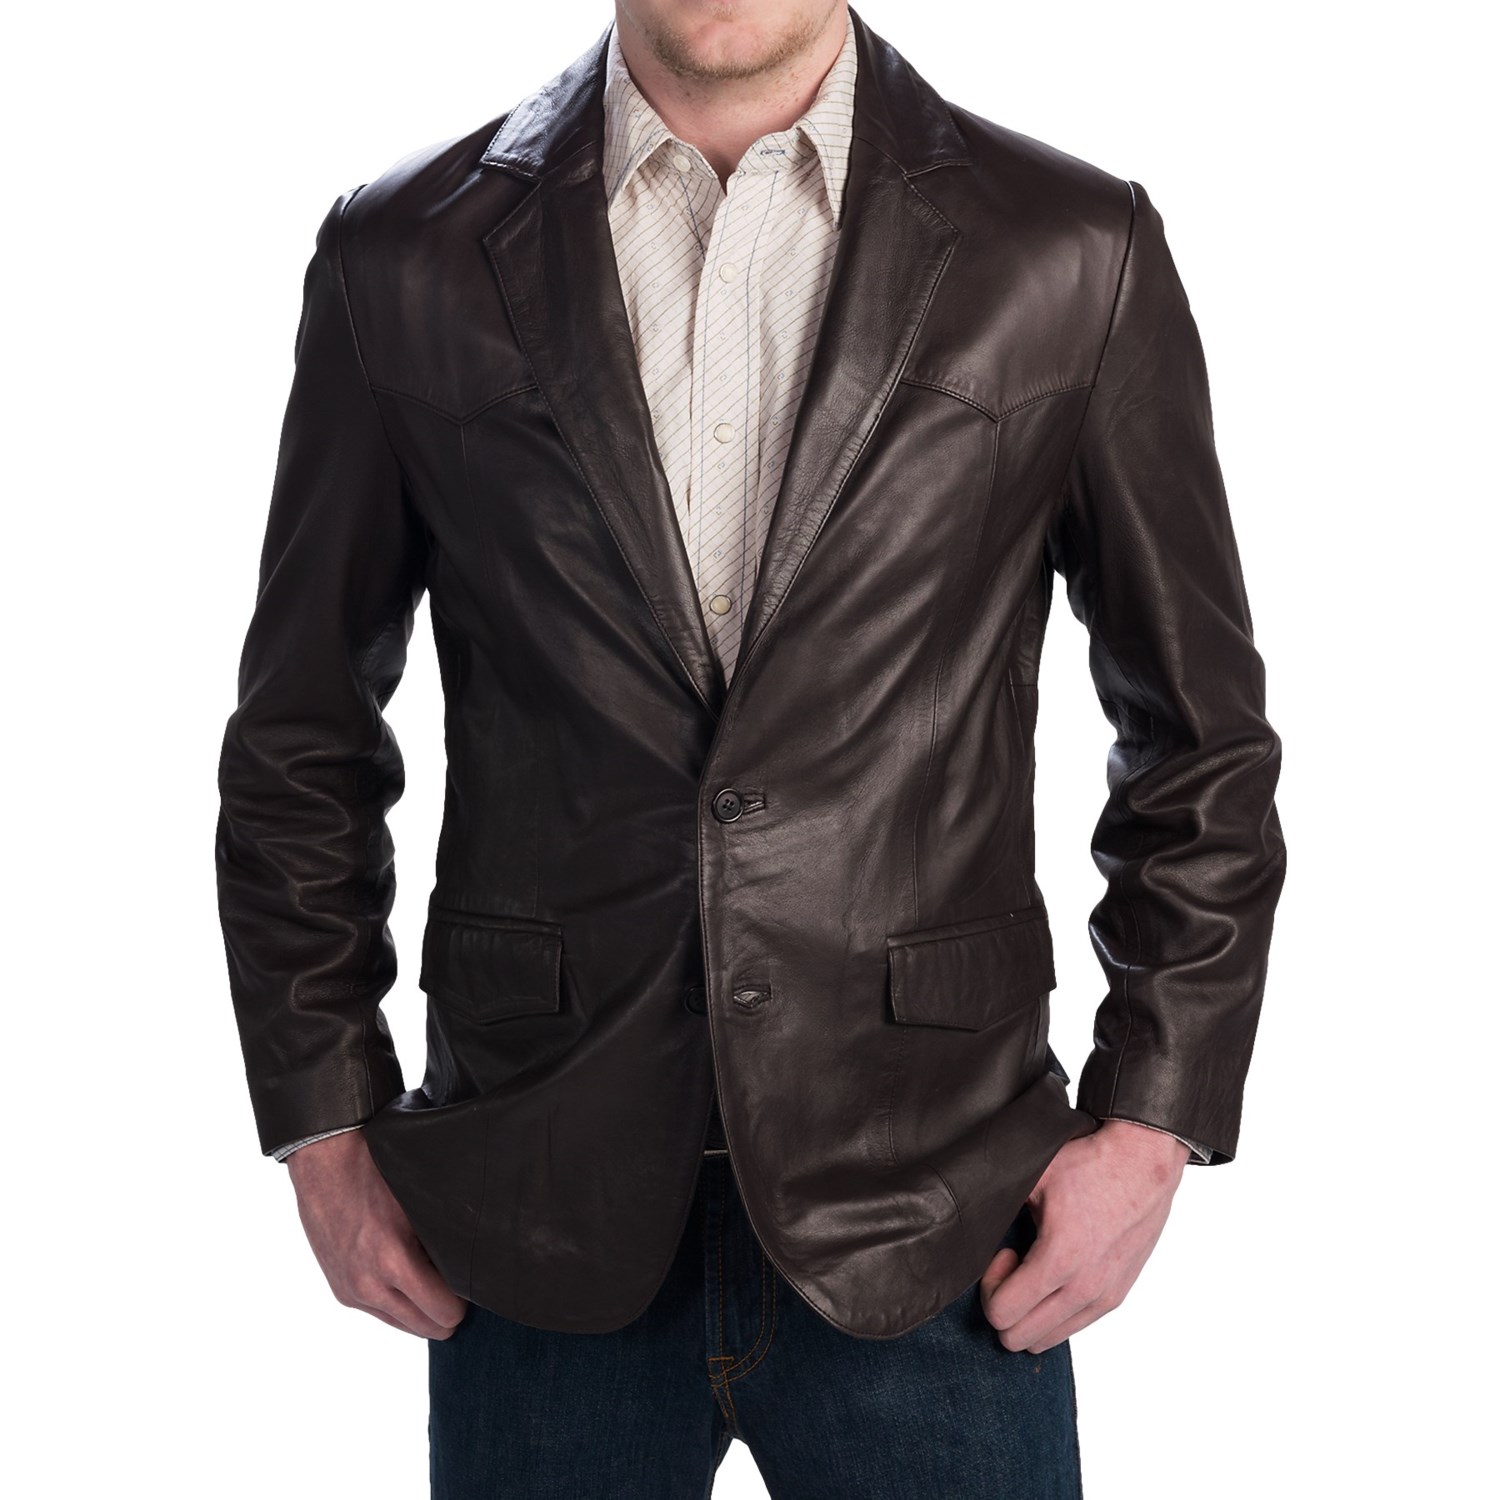 Scully Lambskin Leather Blazer (For Men) 9080T - Save 64%